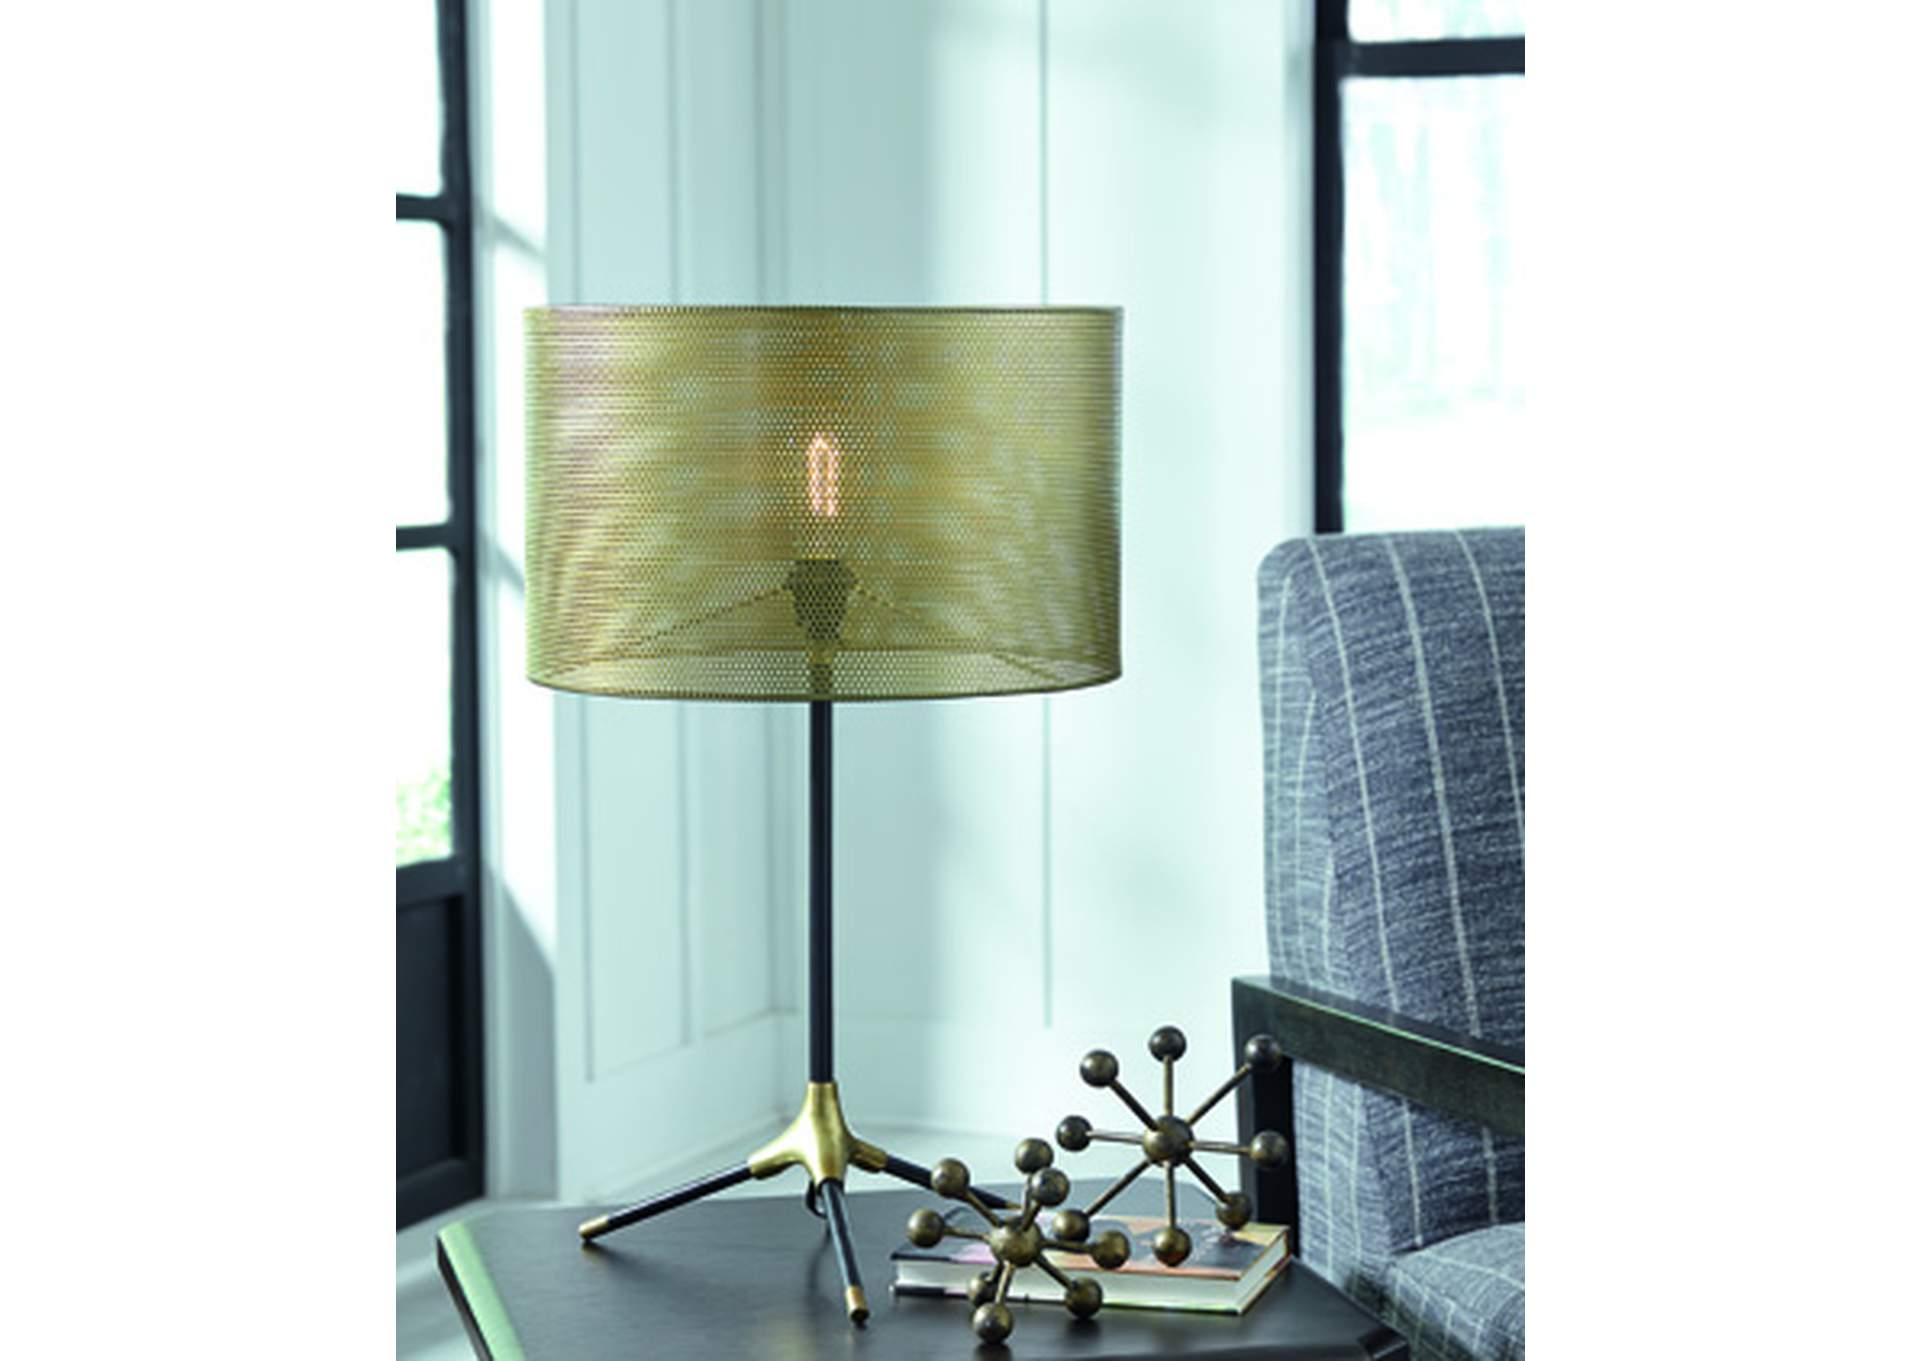 Mance Table Lamp,Signature Design By Ashley